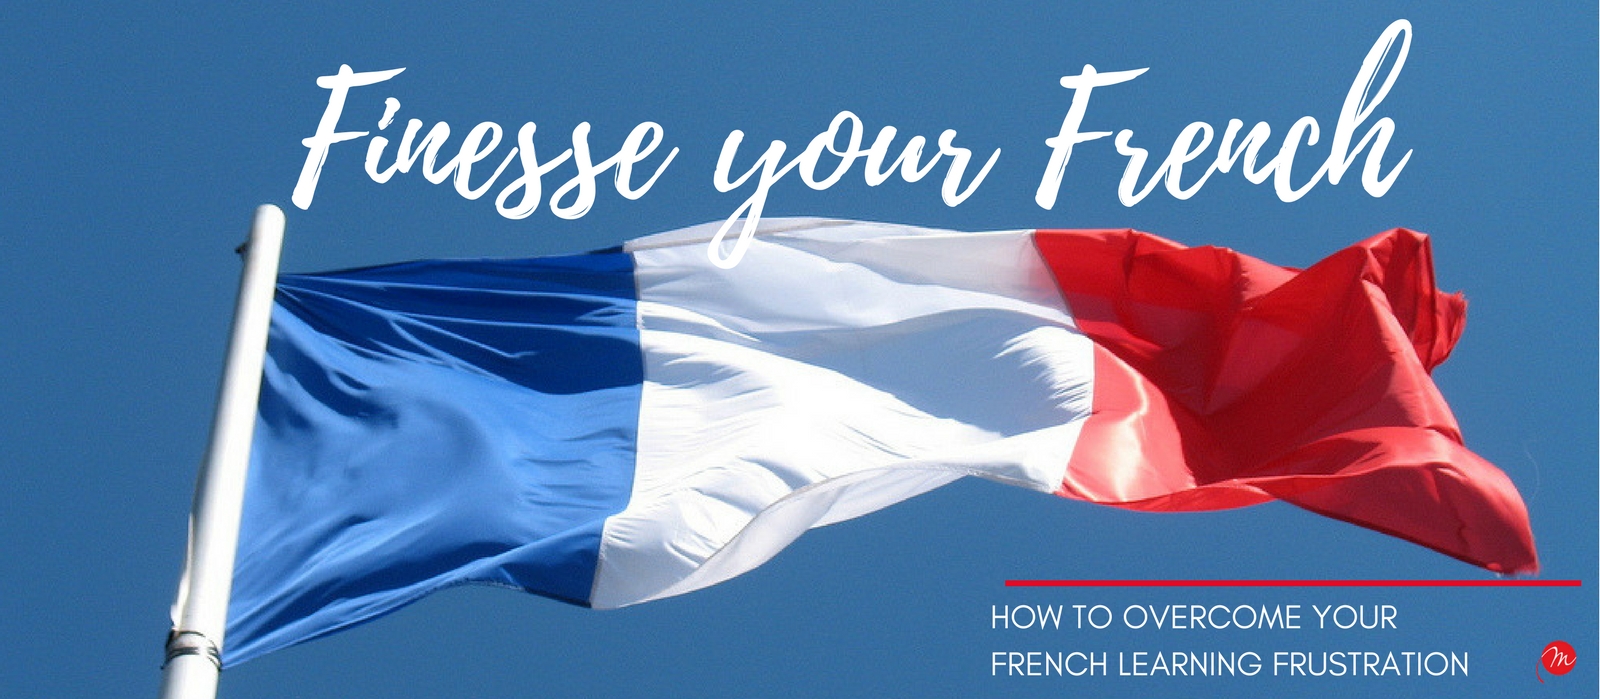 MyFrenchLife.org - My French Life™ - Finesse your French - How to overcome French learning Frustration - Header